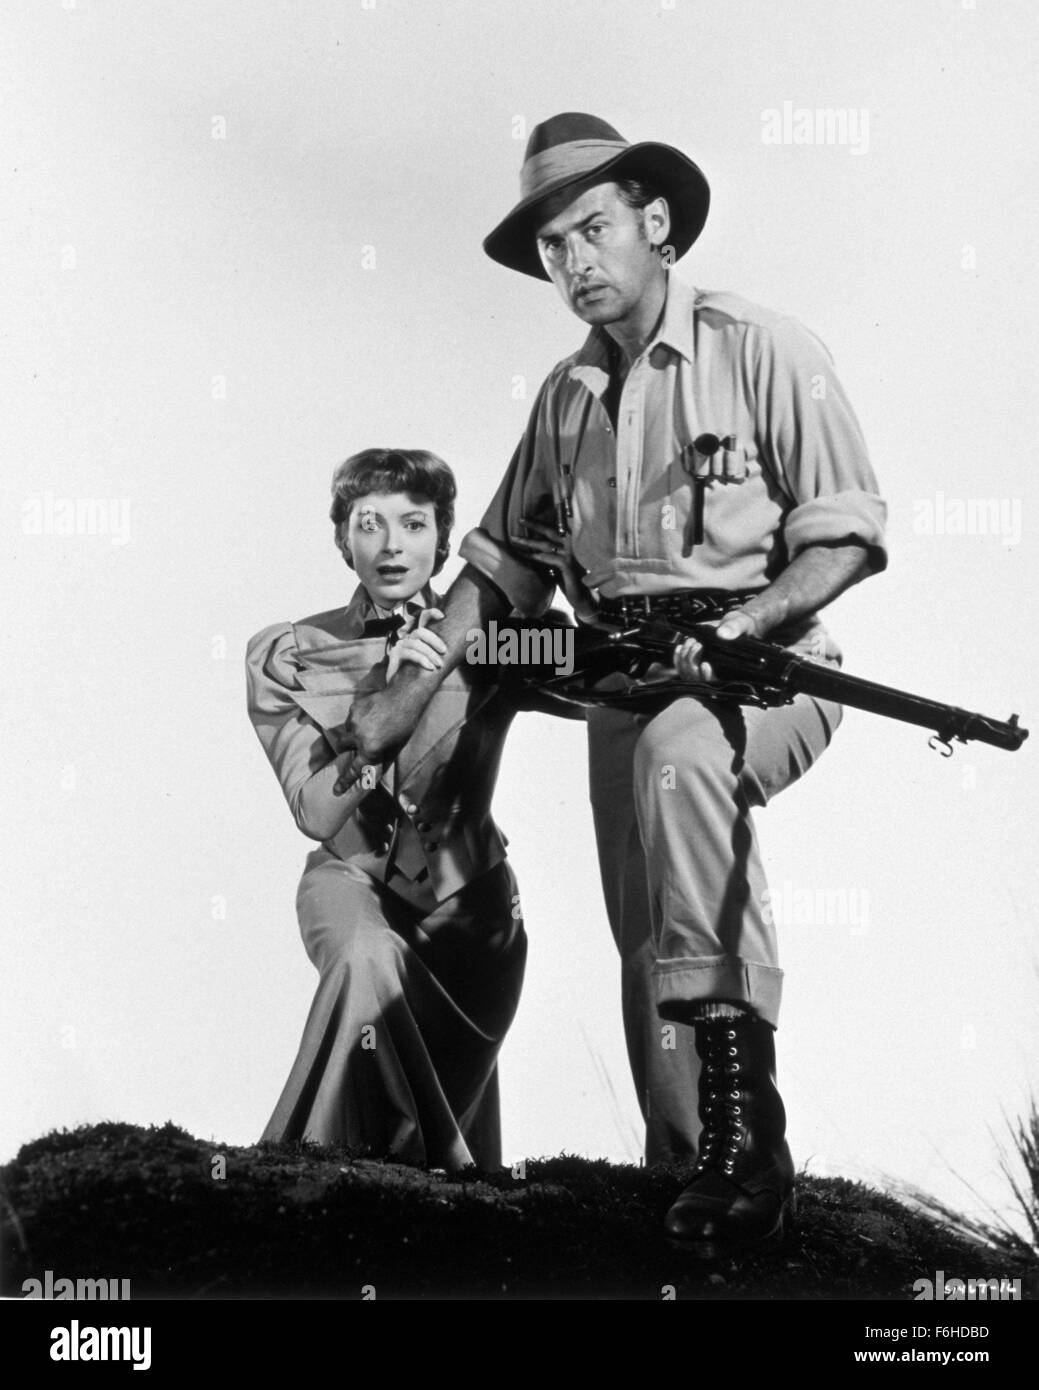 1950, Film Title: KING SOLOMON'S MINES, Director: COMPTON, ANDREW MARTON BENNETT, Studio: MGM, Pictured: COMPTON, ANDREW MARTON BENNETT, STEWART GRANGER, DEBORAH KERR, RIFLE, WEAPONS. (Credit Image: SNAP) Stock Photo